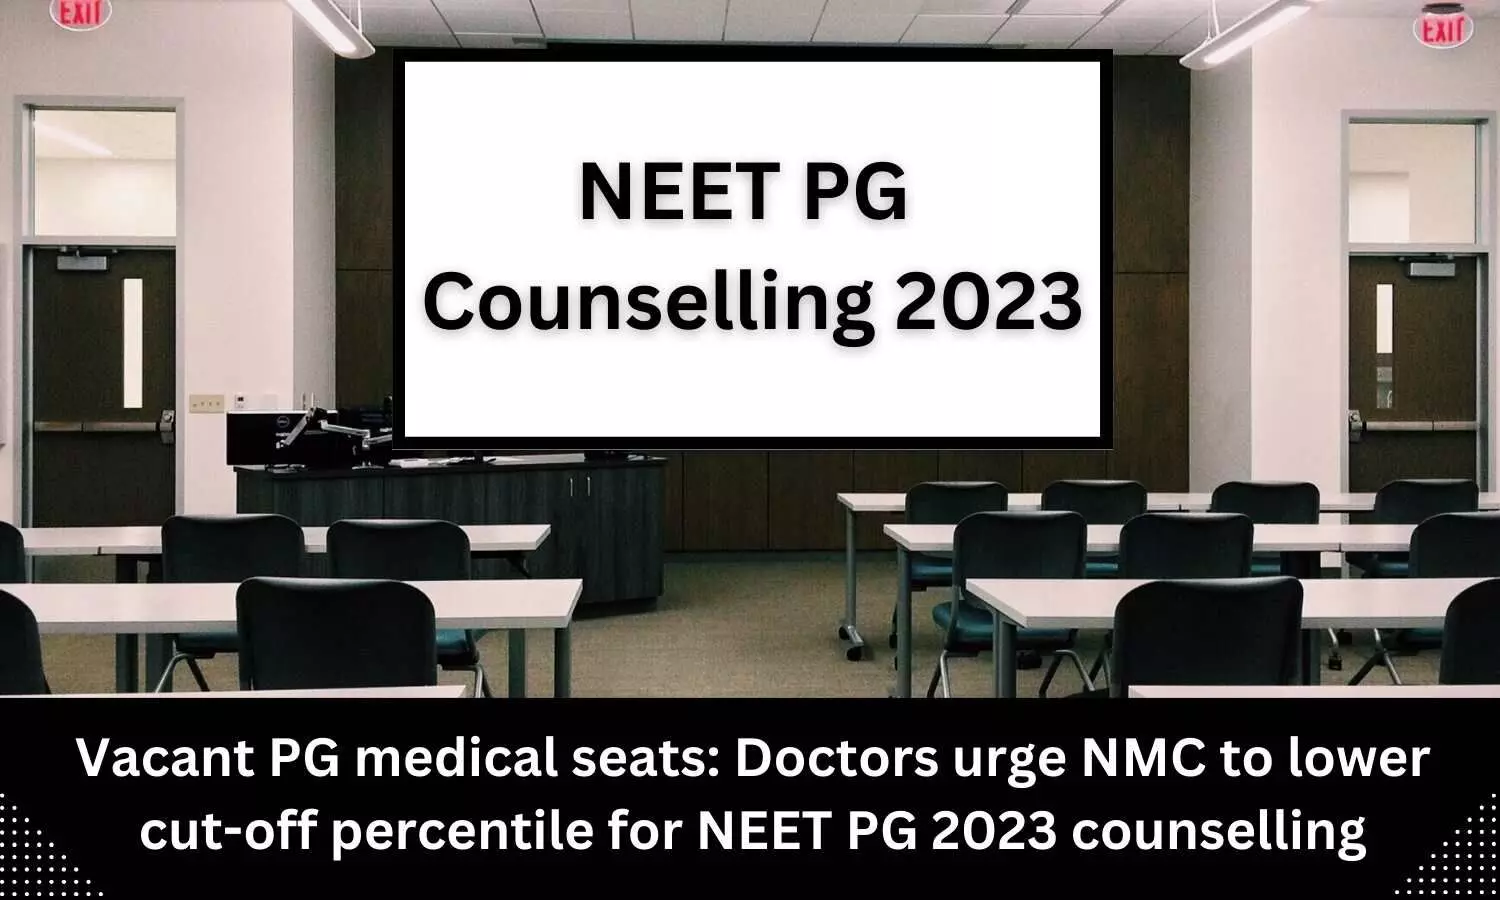 Reduce cut off percentile for NEET PG Counselling 2023: Doctors urges NMC